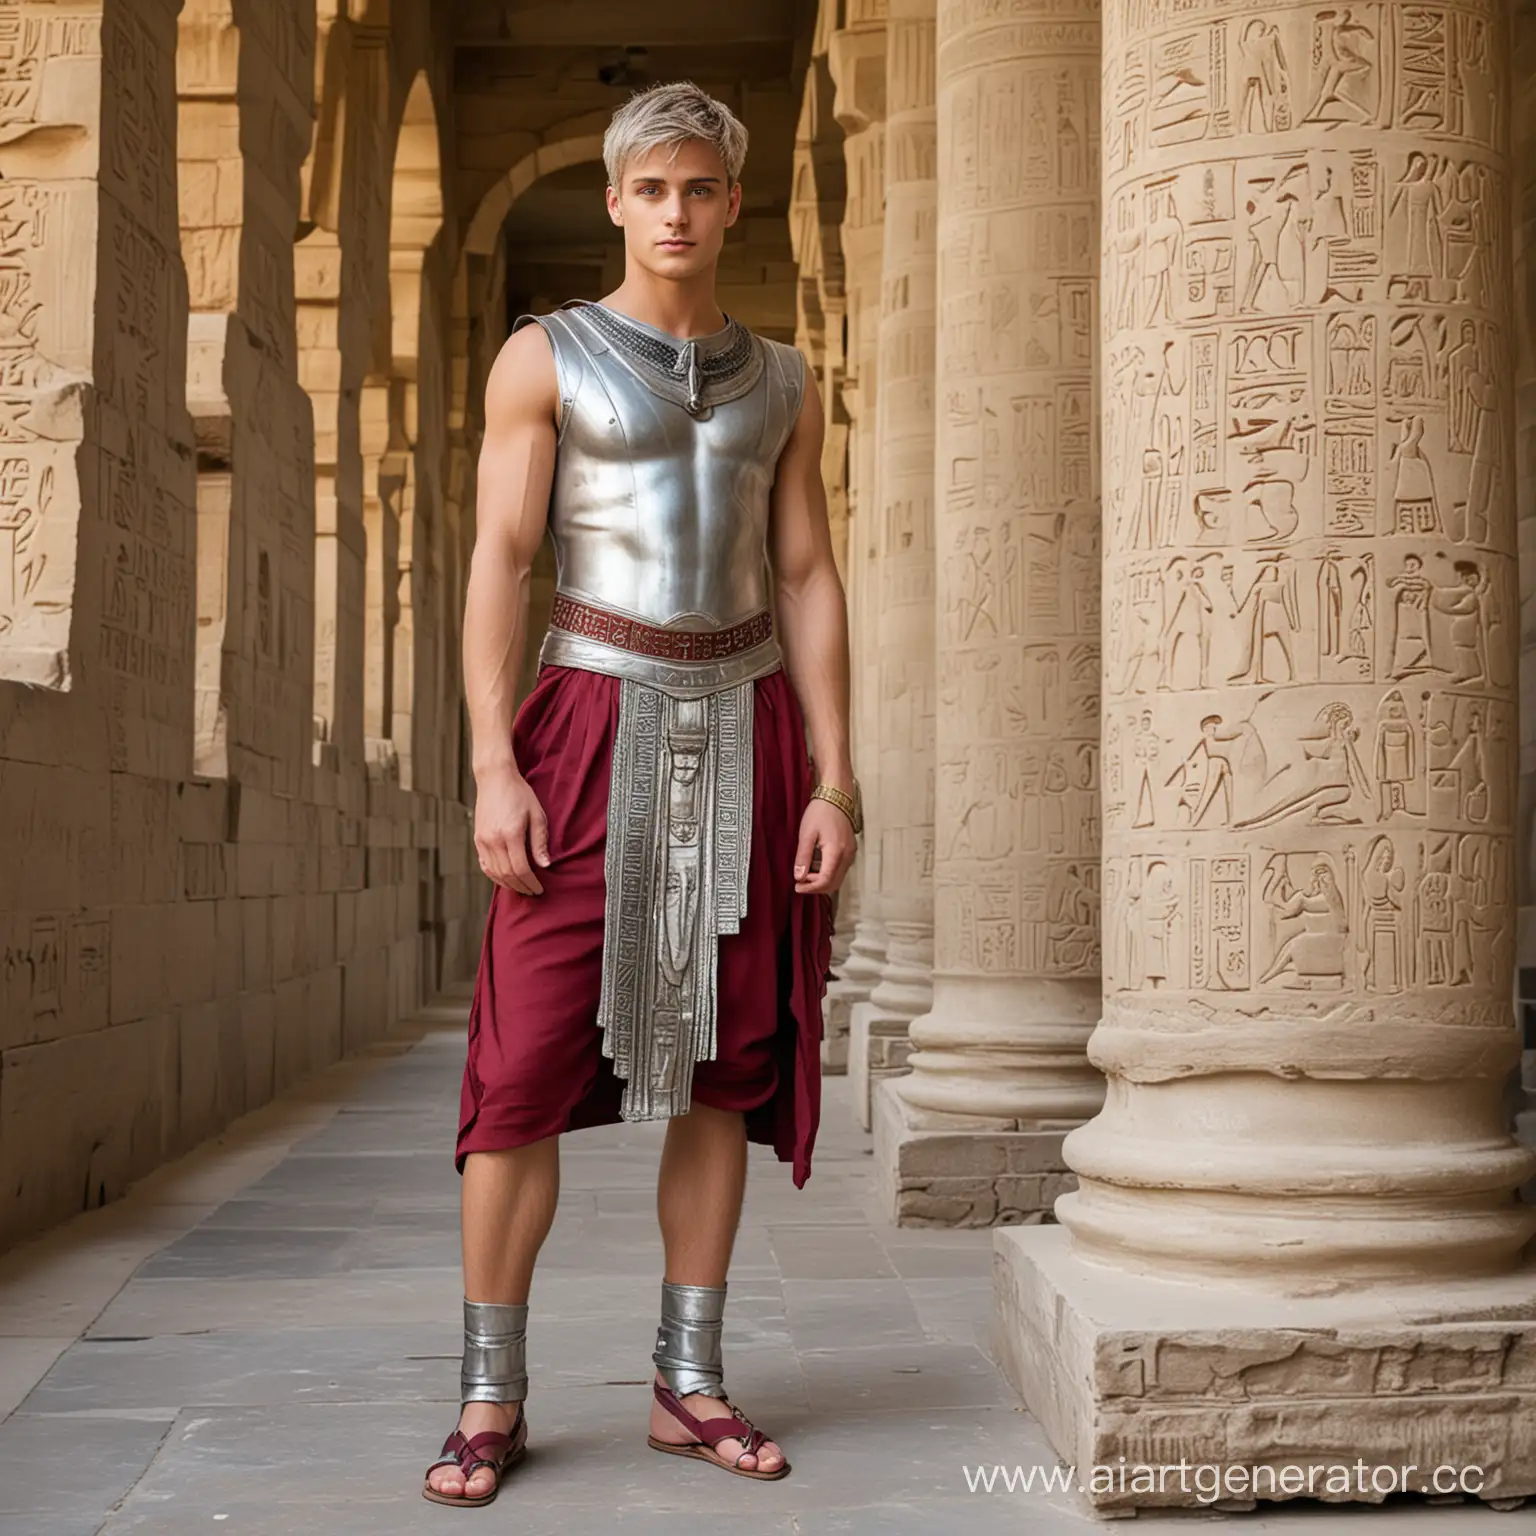 BronzeSkinned-Youth-in-Egyptian-Attire-Stands-on-Palace-Terrace